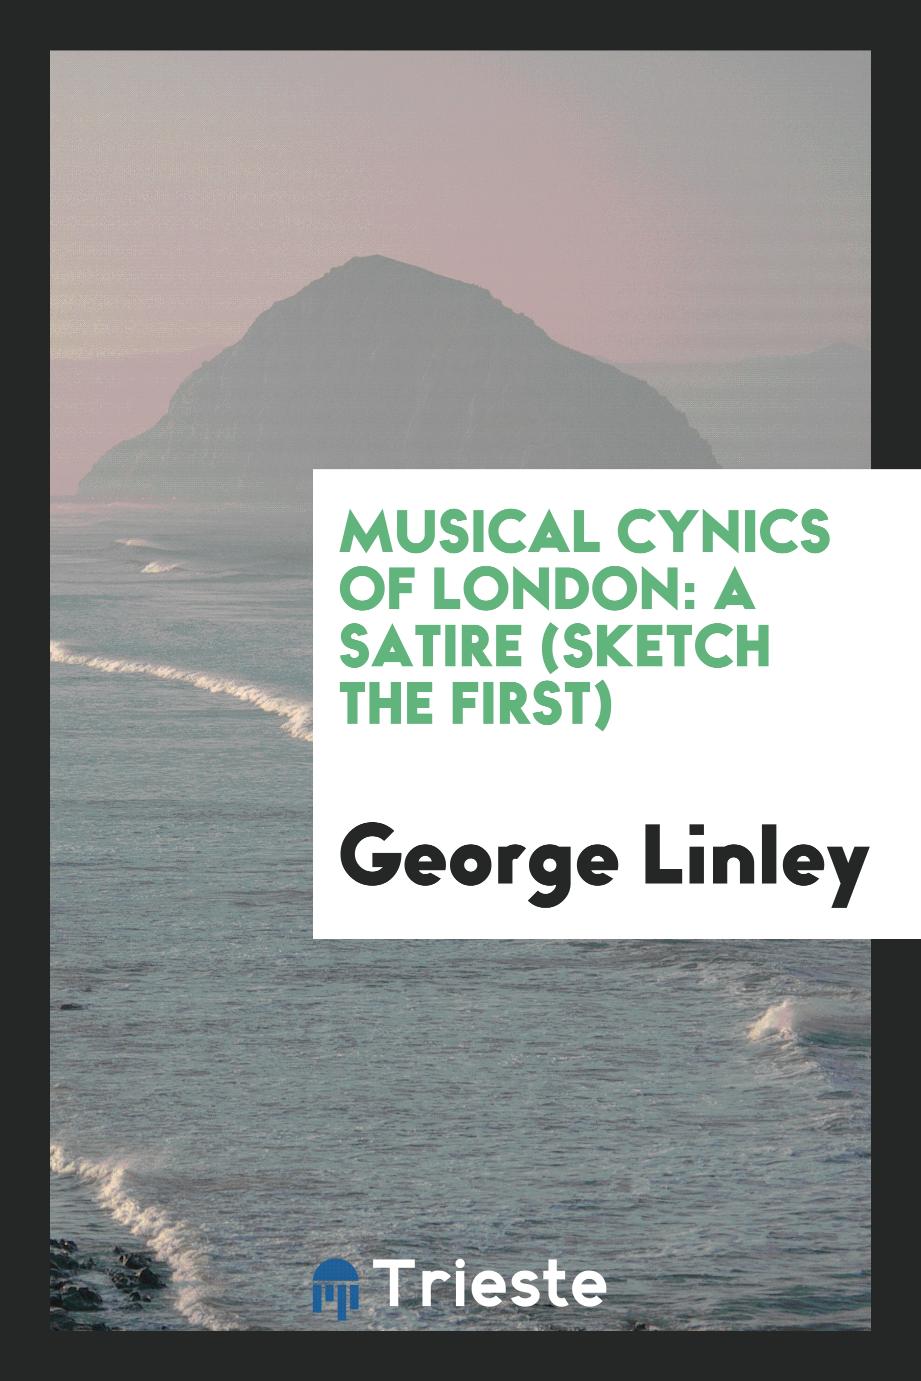 Musical Cynics of London: A Satire (sketch the First)